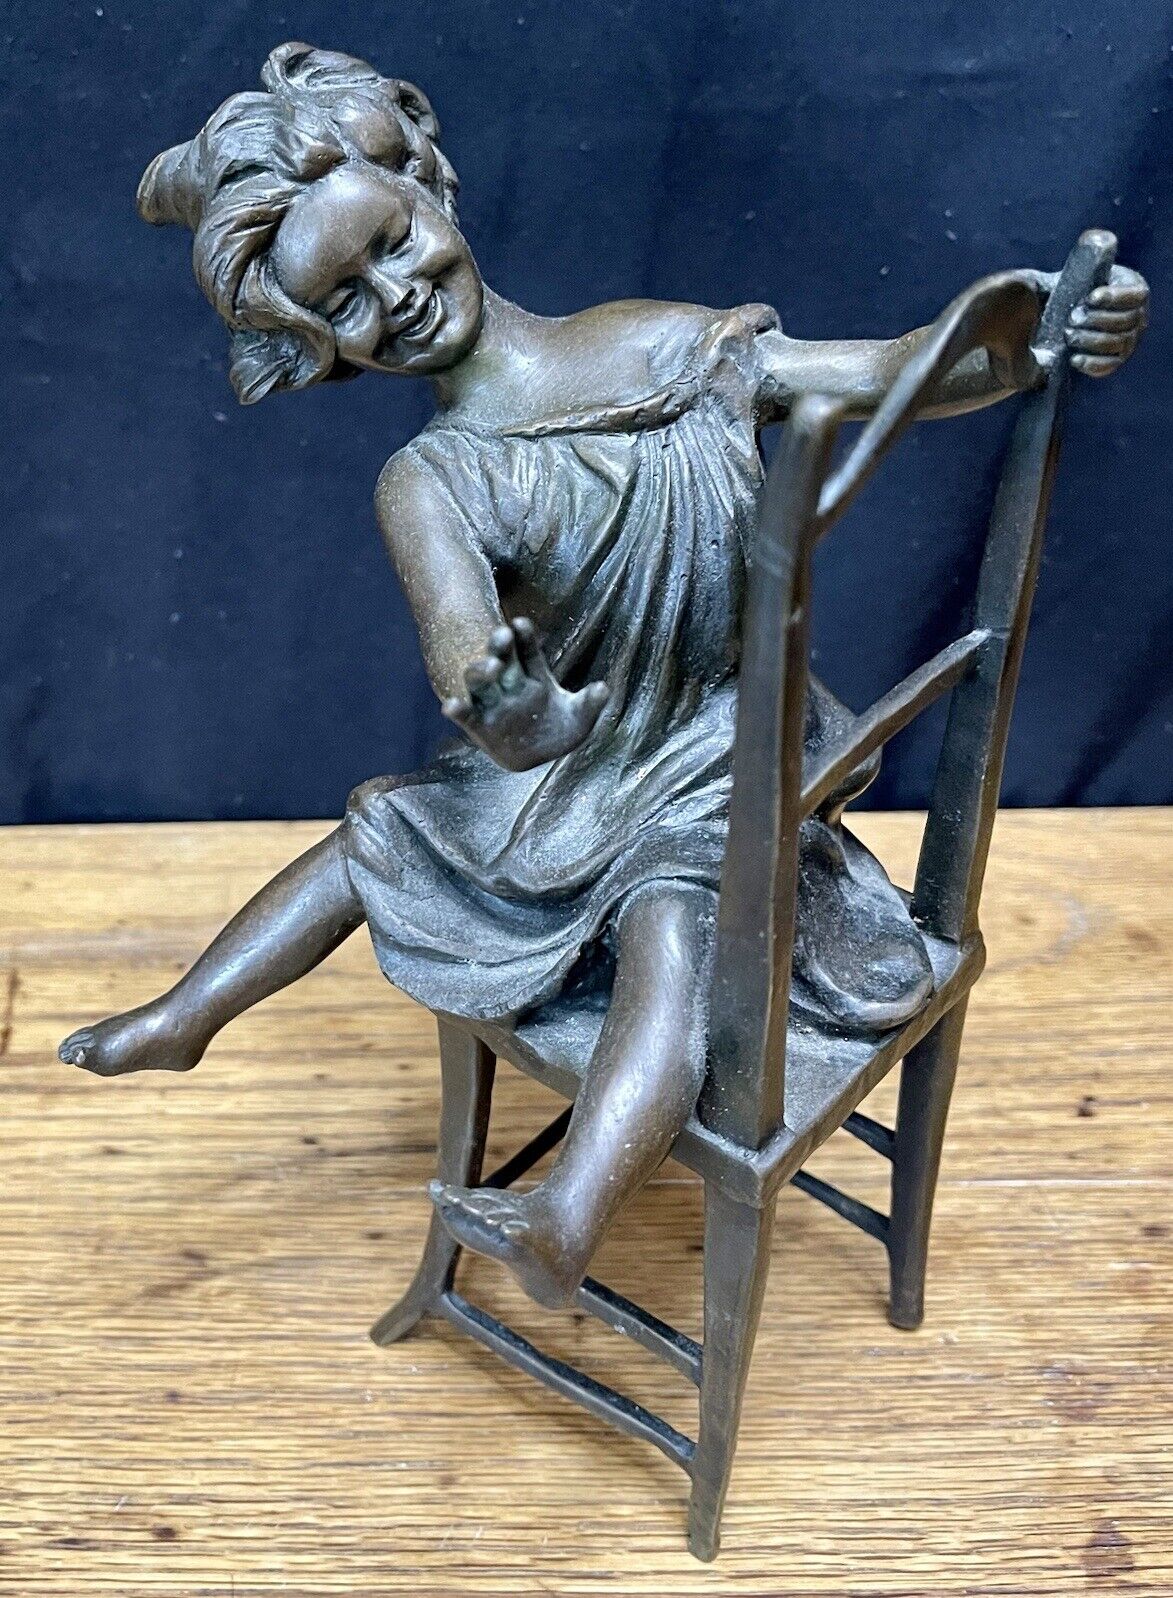 Vintage Signed Bronze Girl On Chair. Beautiful Art Work. Happy, Fun, Child